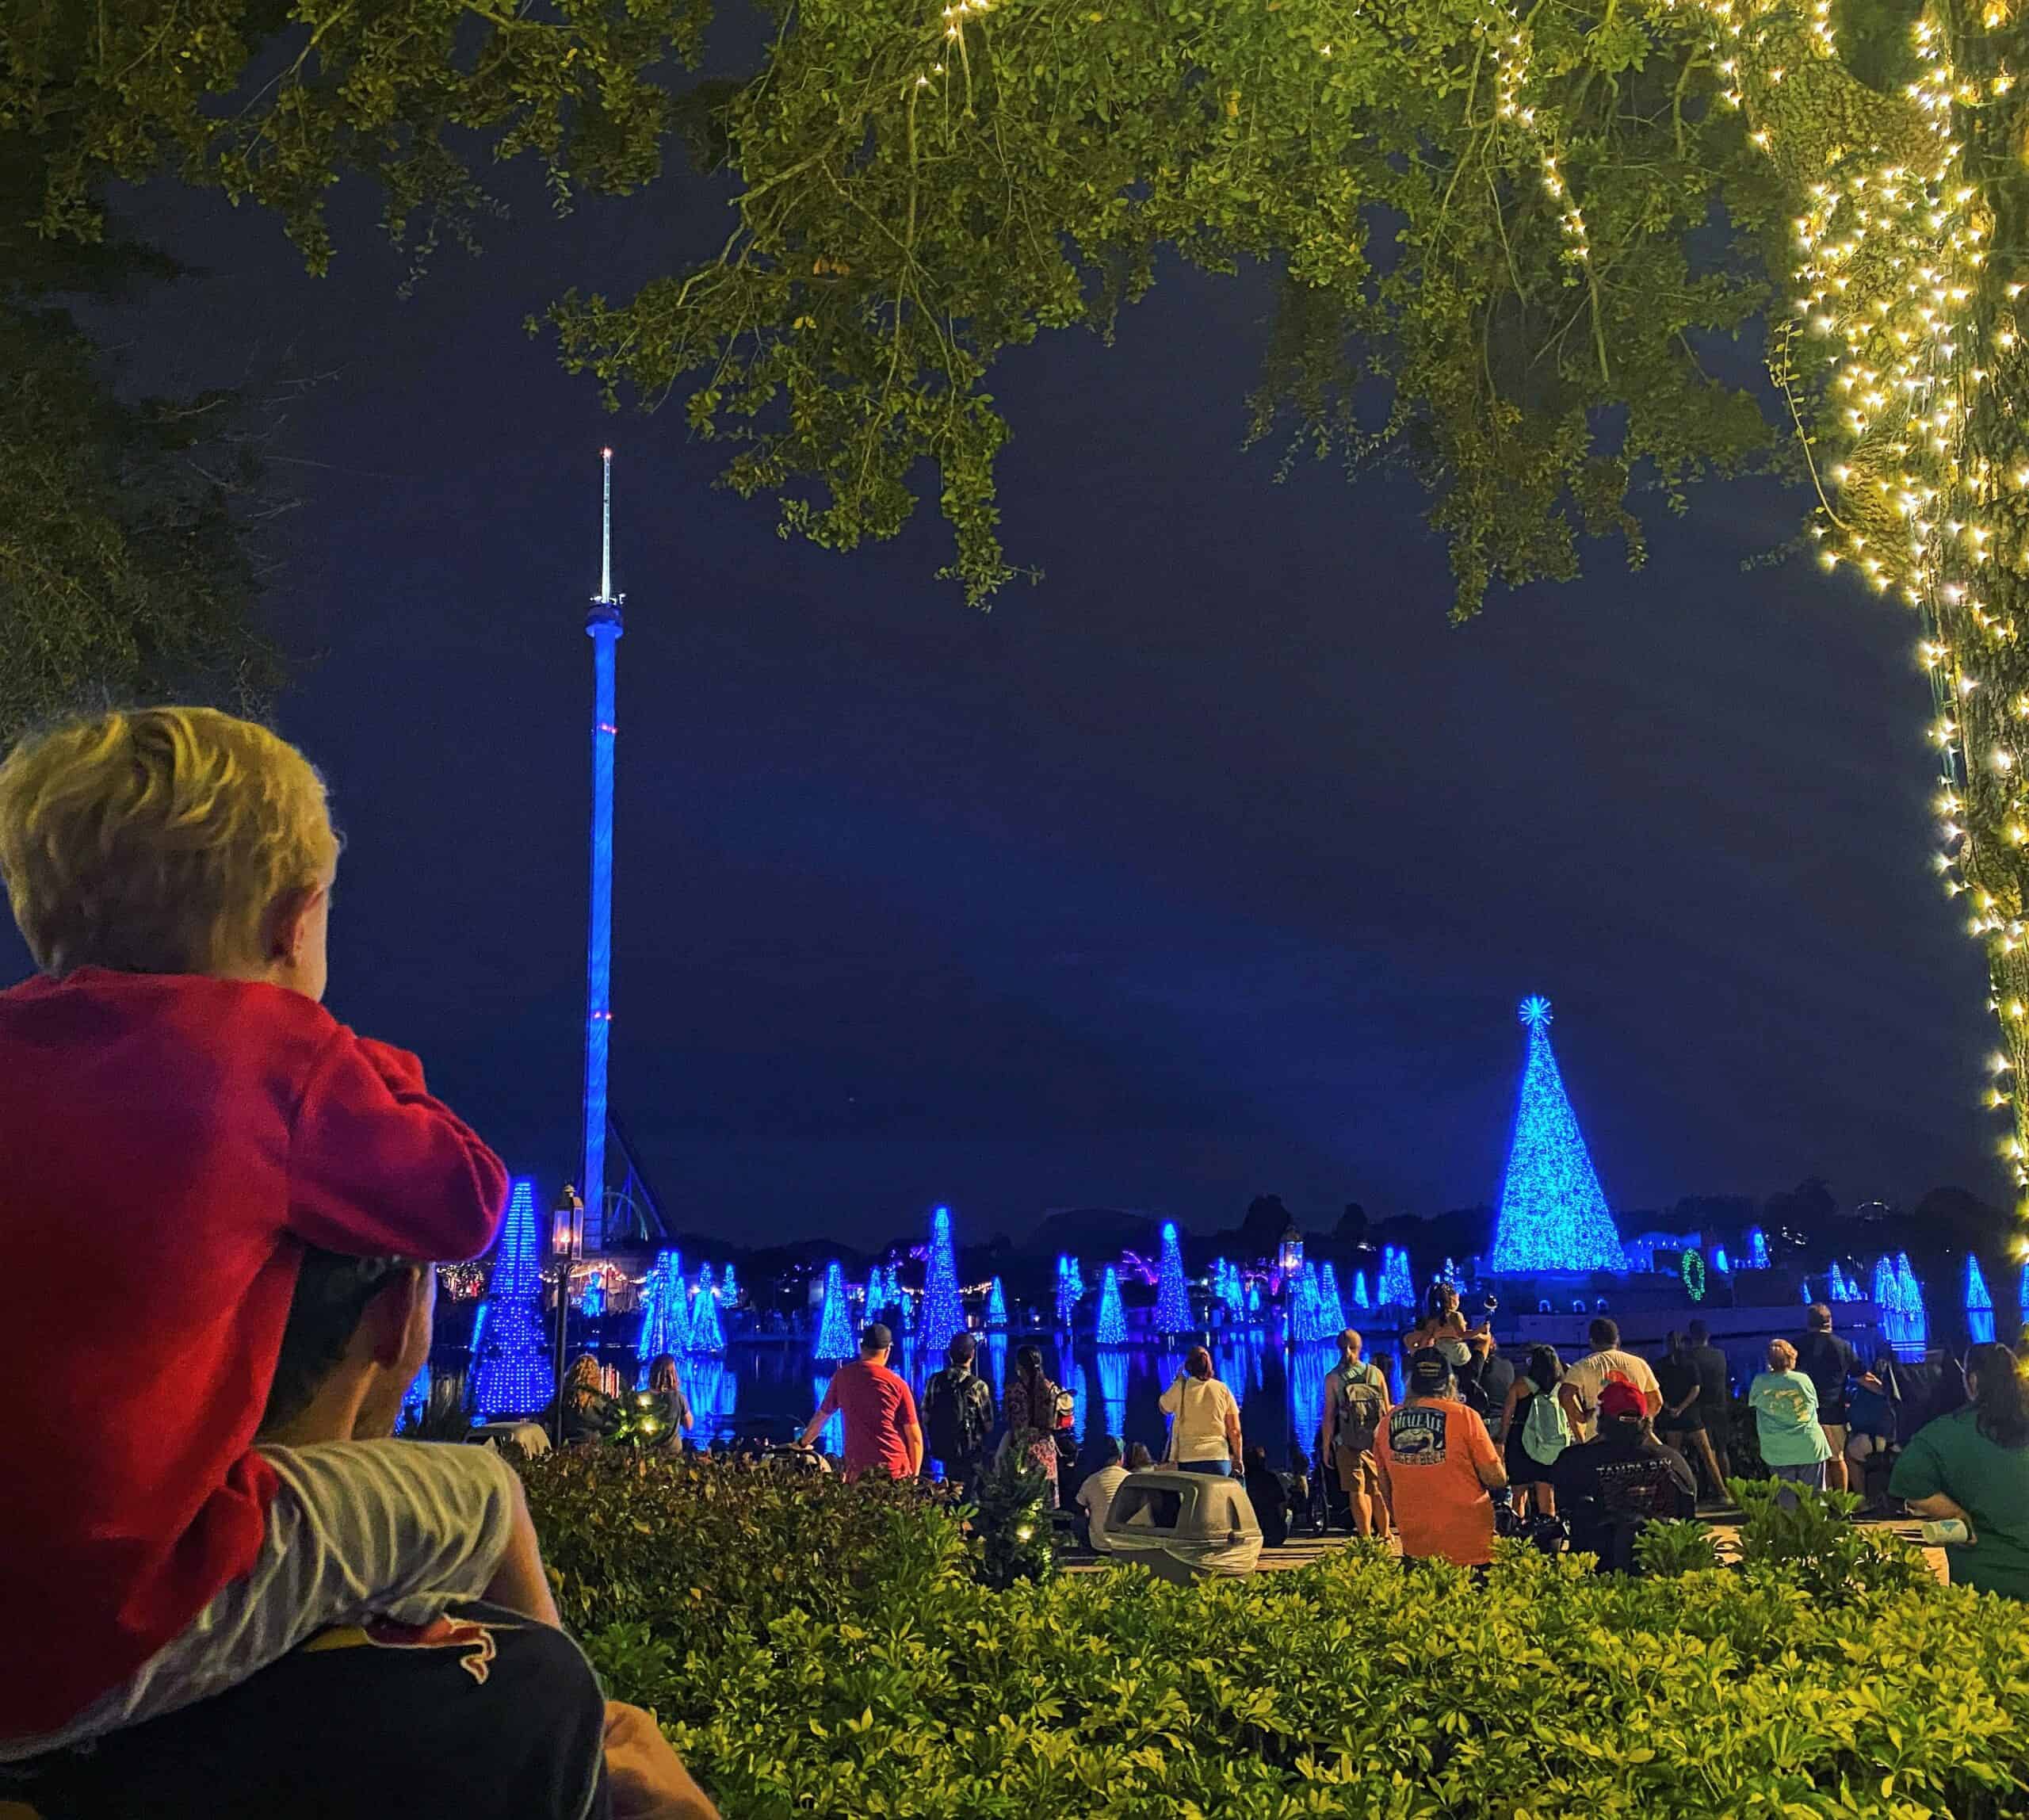 Cap off your night with Sea of Trees - this photo was taken at night. A father wearing a dark colored t-shirt has his back to the camera, with his three year old son on his shoulders who is wearing a red long sleeve shirt. A tree with white christmas lights is in the foreground and multiple Christmas trees with blue LED lights is in the background.  